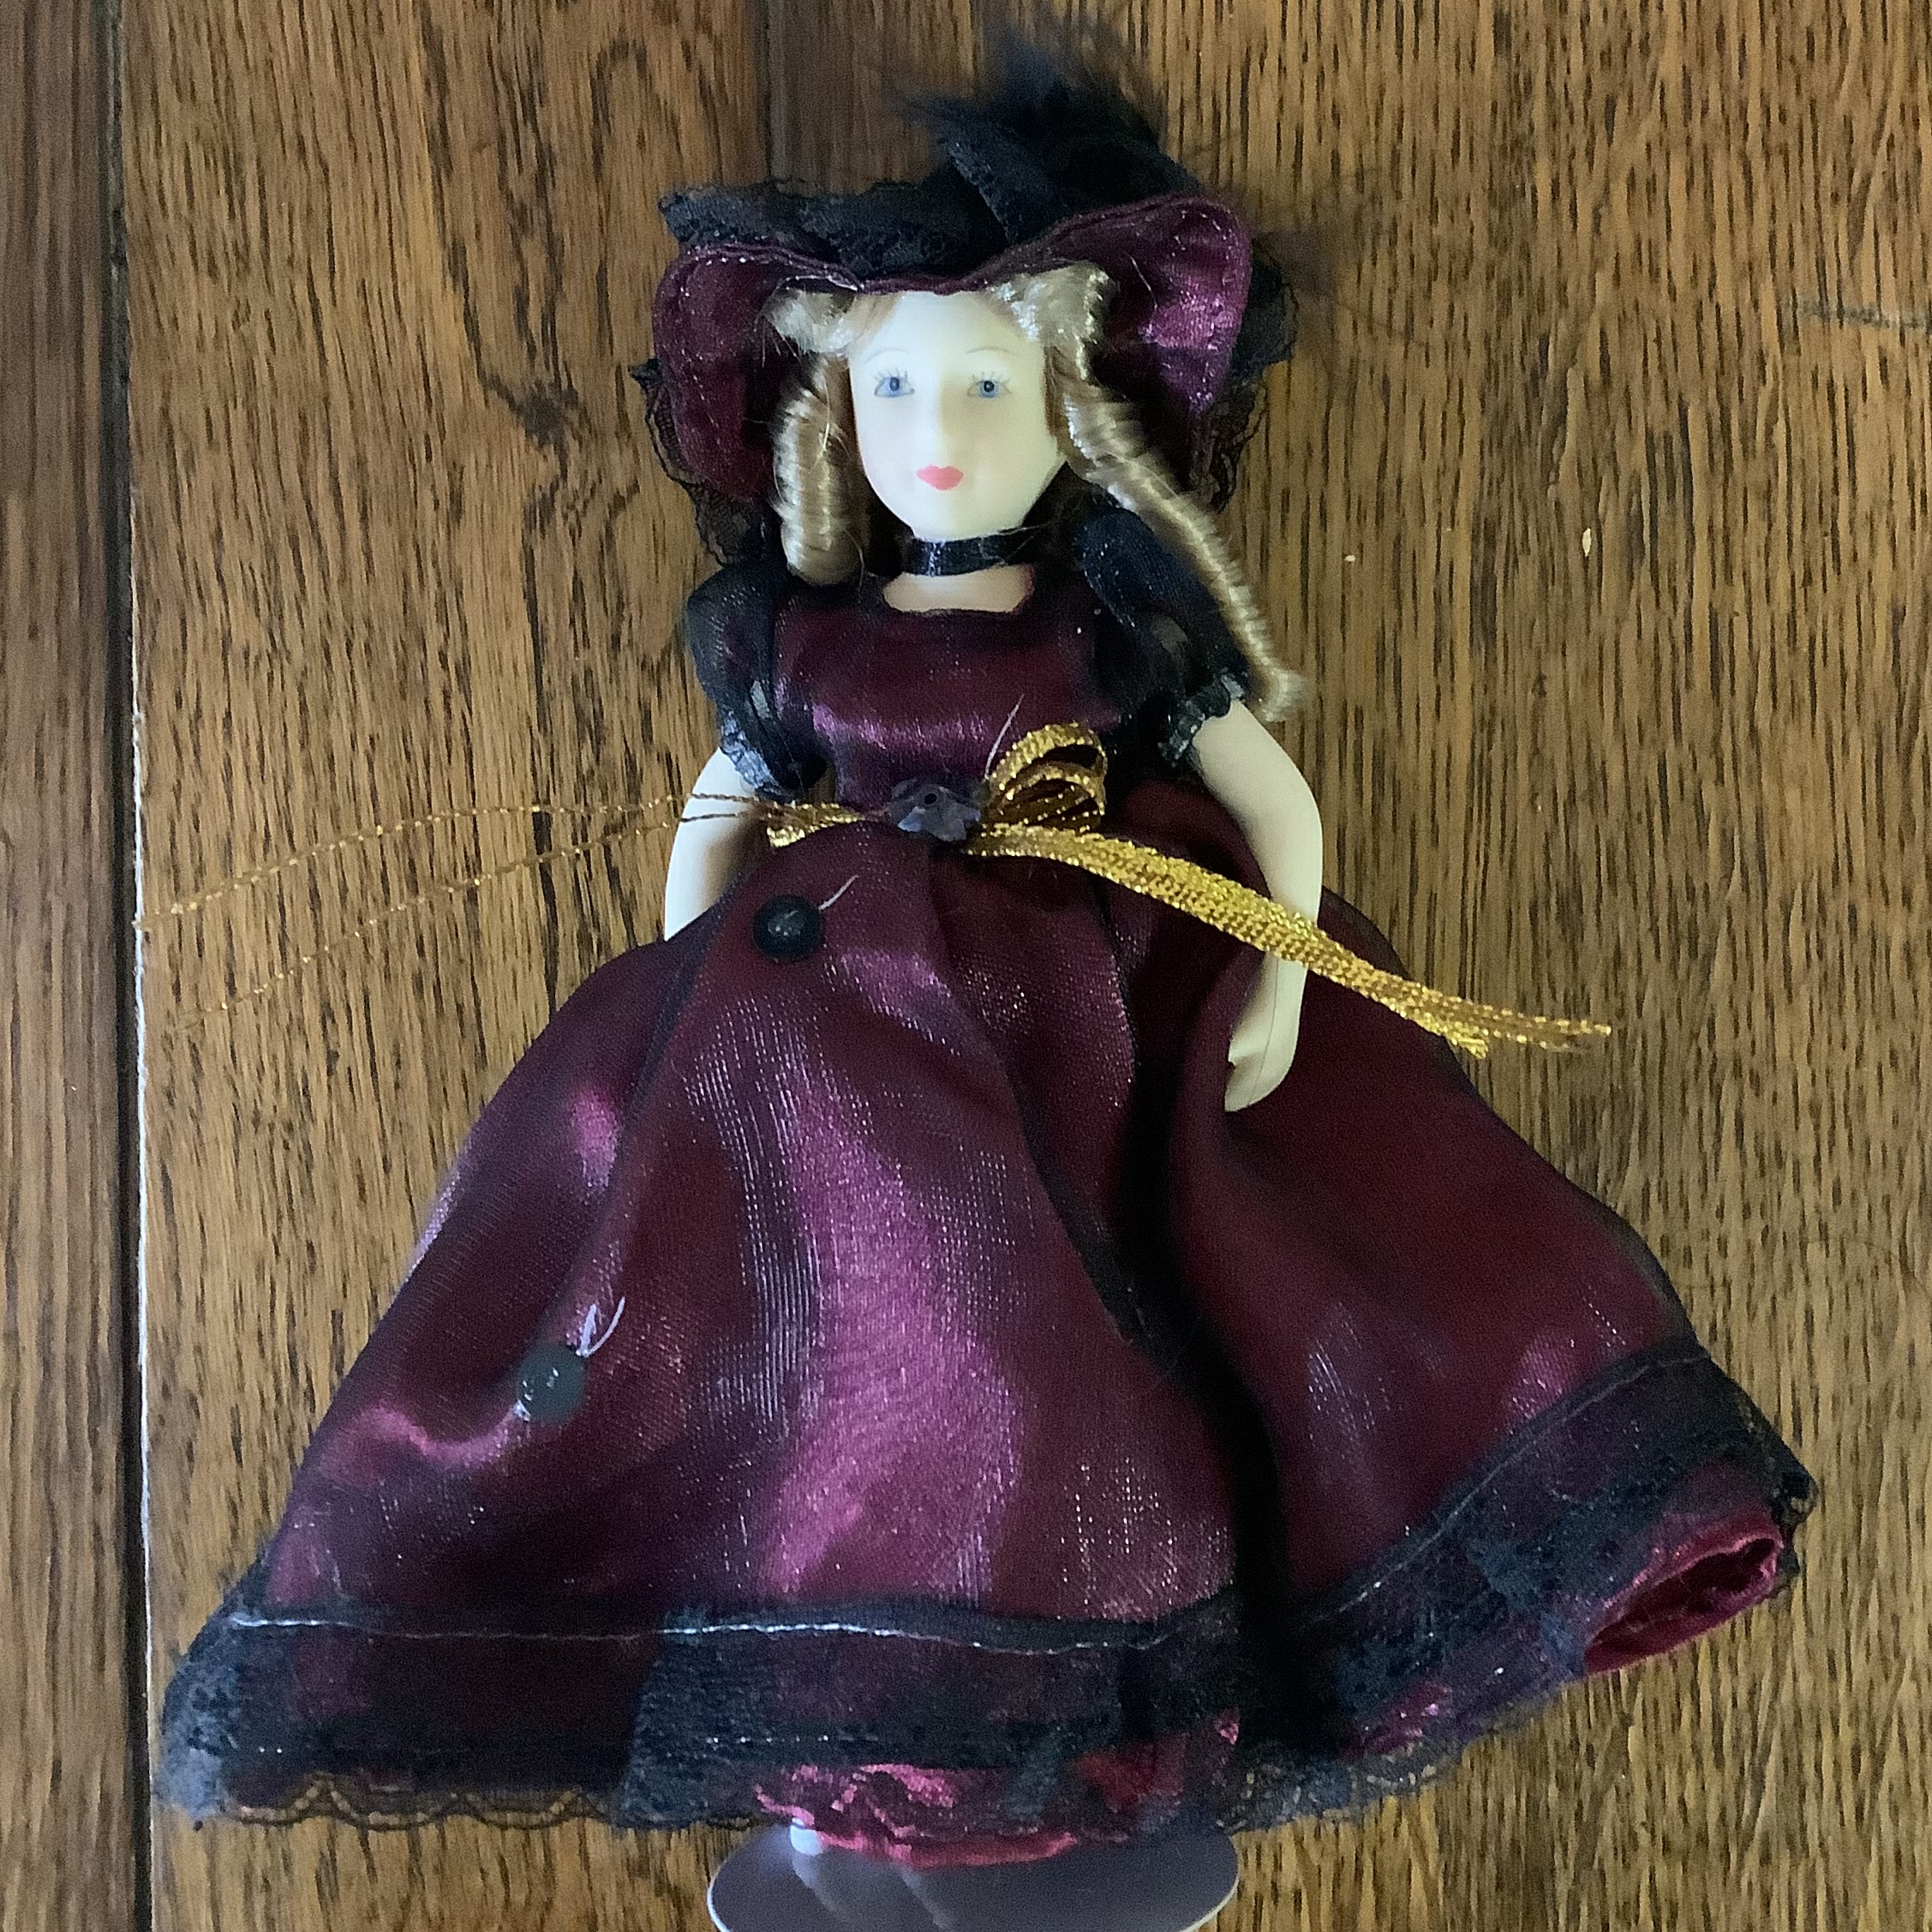 Very small 8-inch modern lady doll in purple dress and hat in synthetic fibres